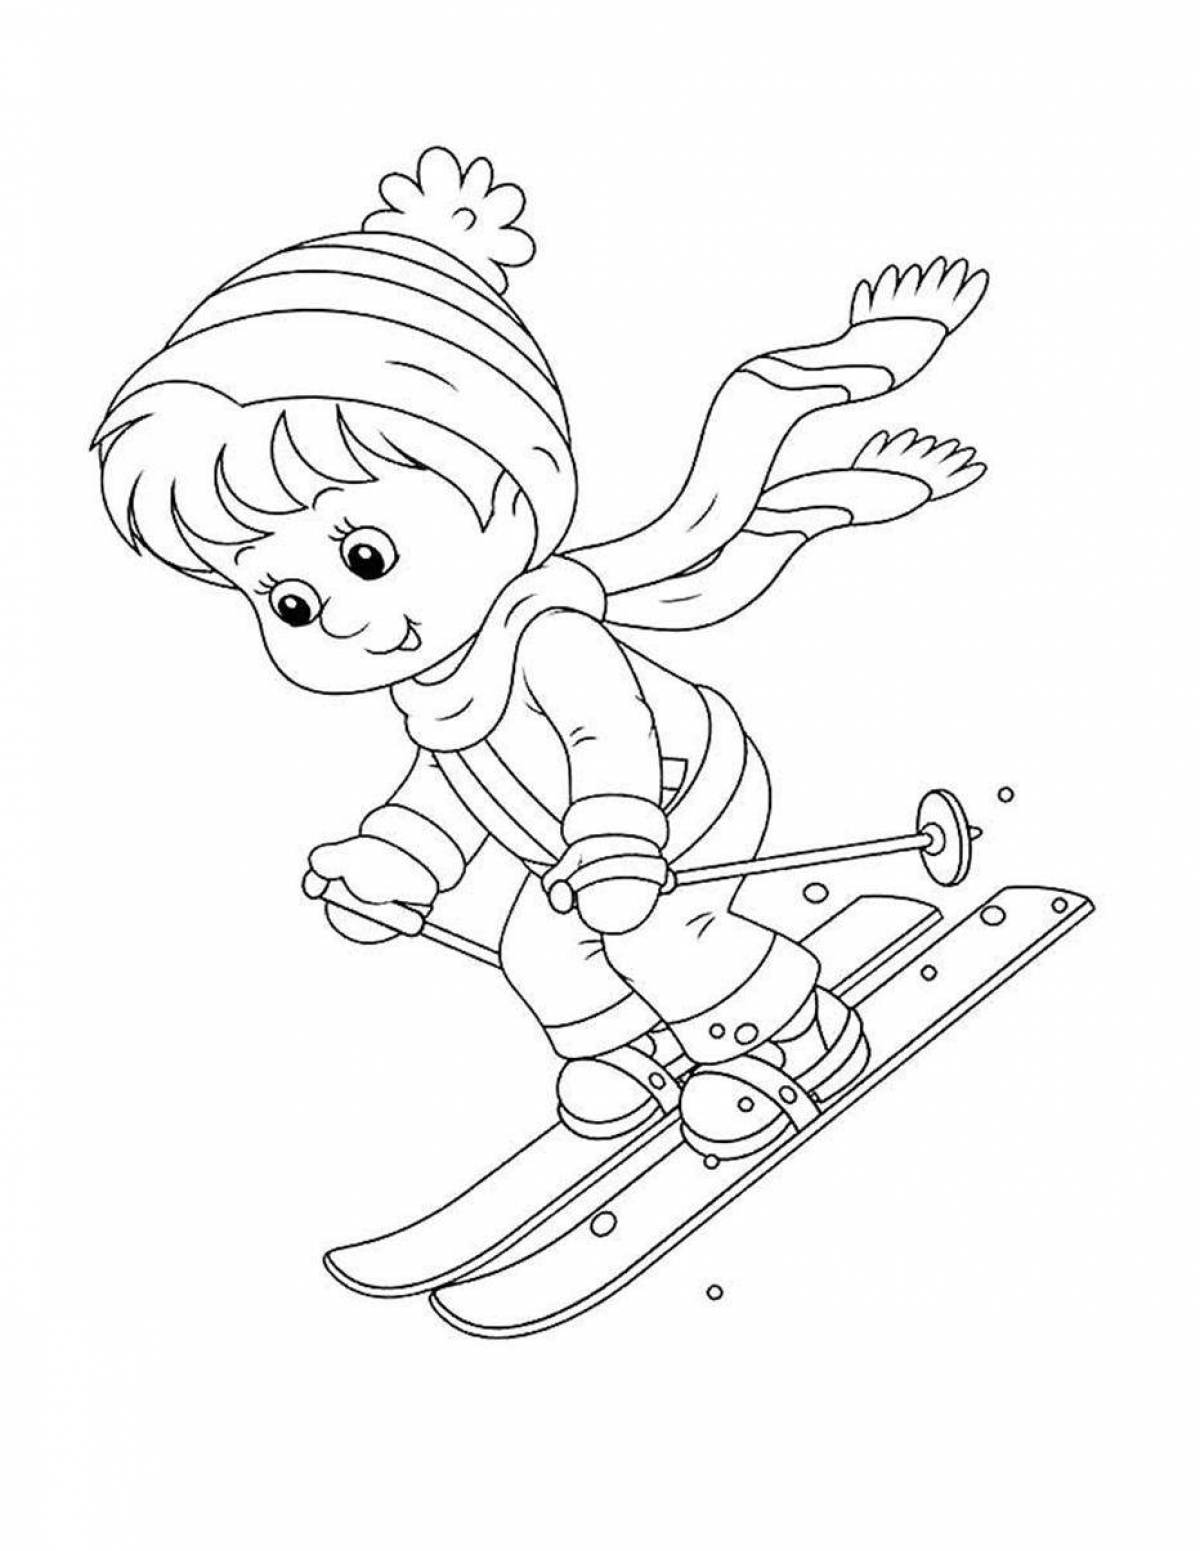 Fun coloring book winter sports for 4-5 year olds